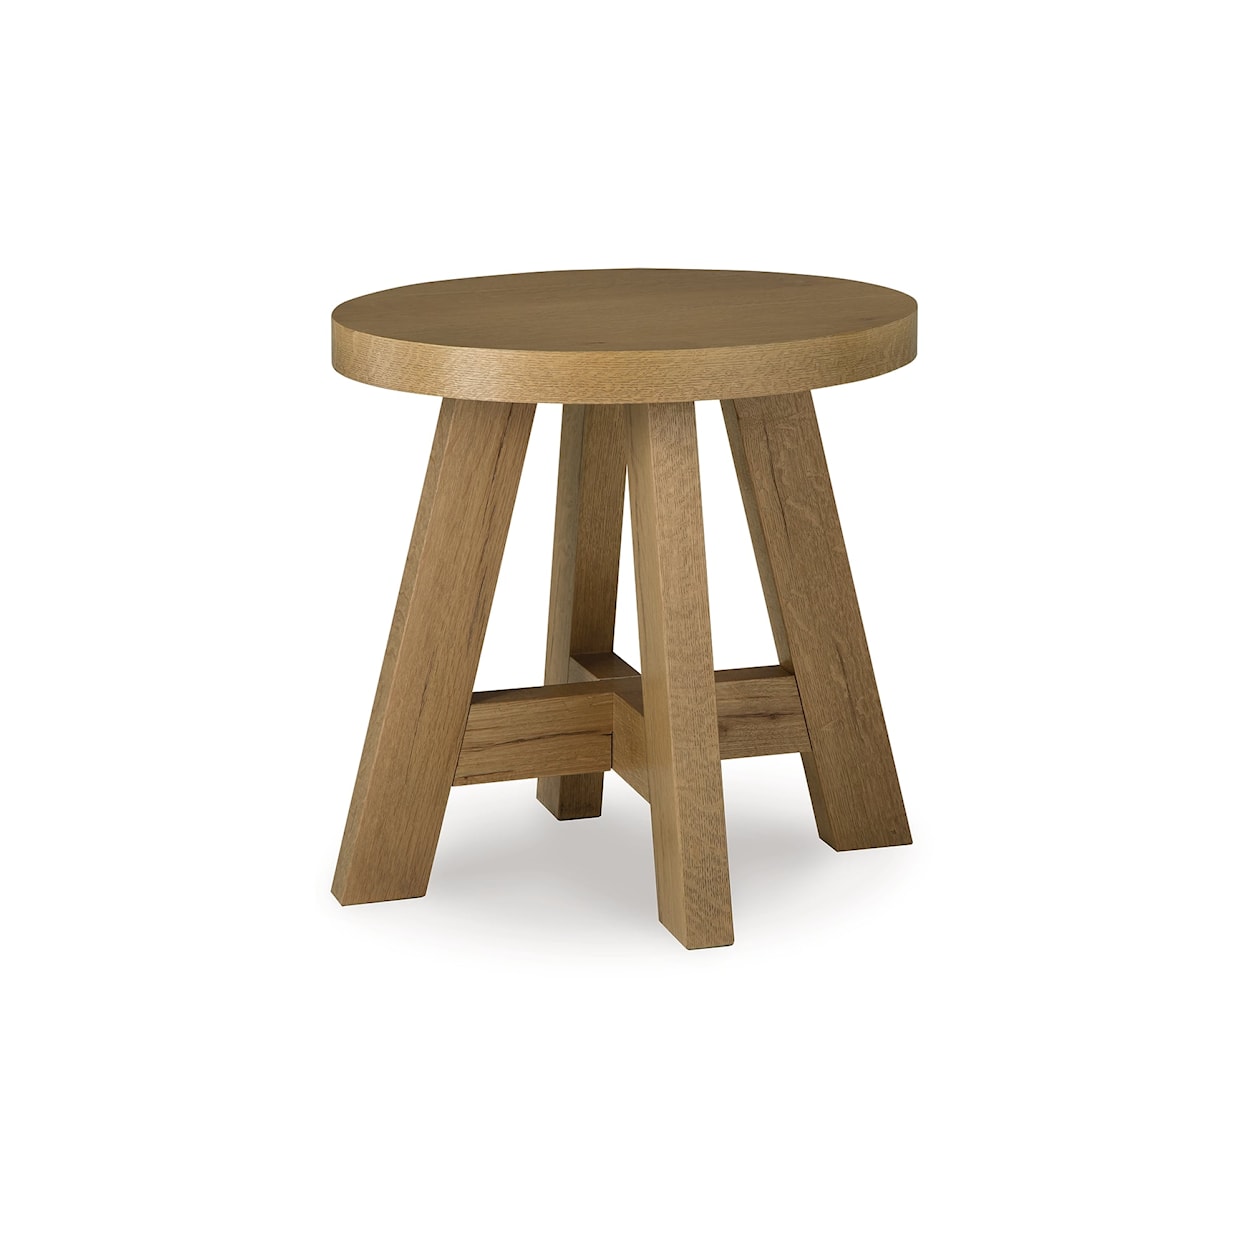 Benchcraft Brinstead Oval End Table